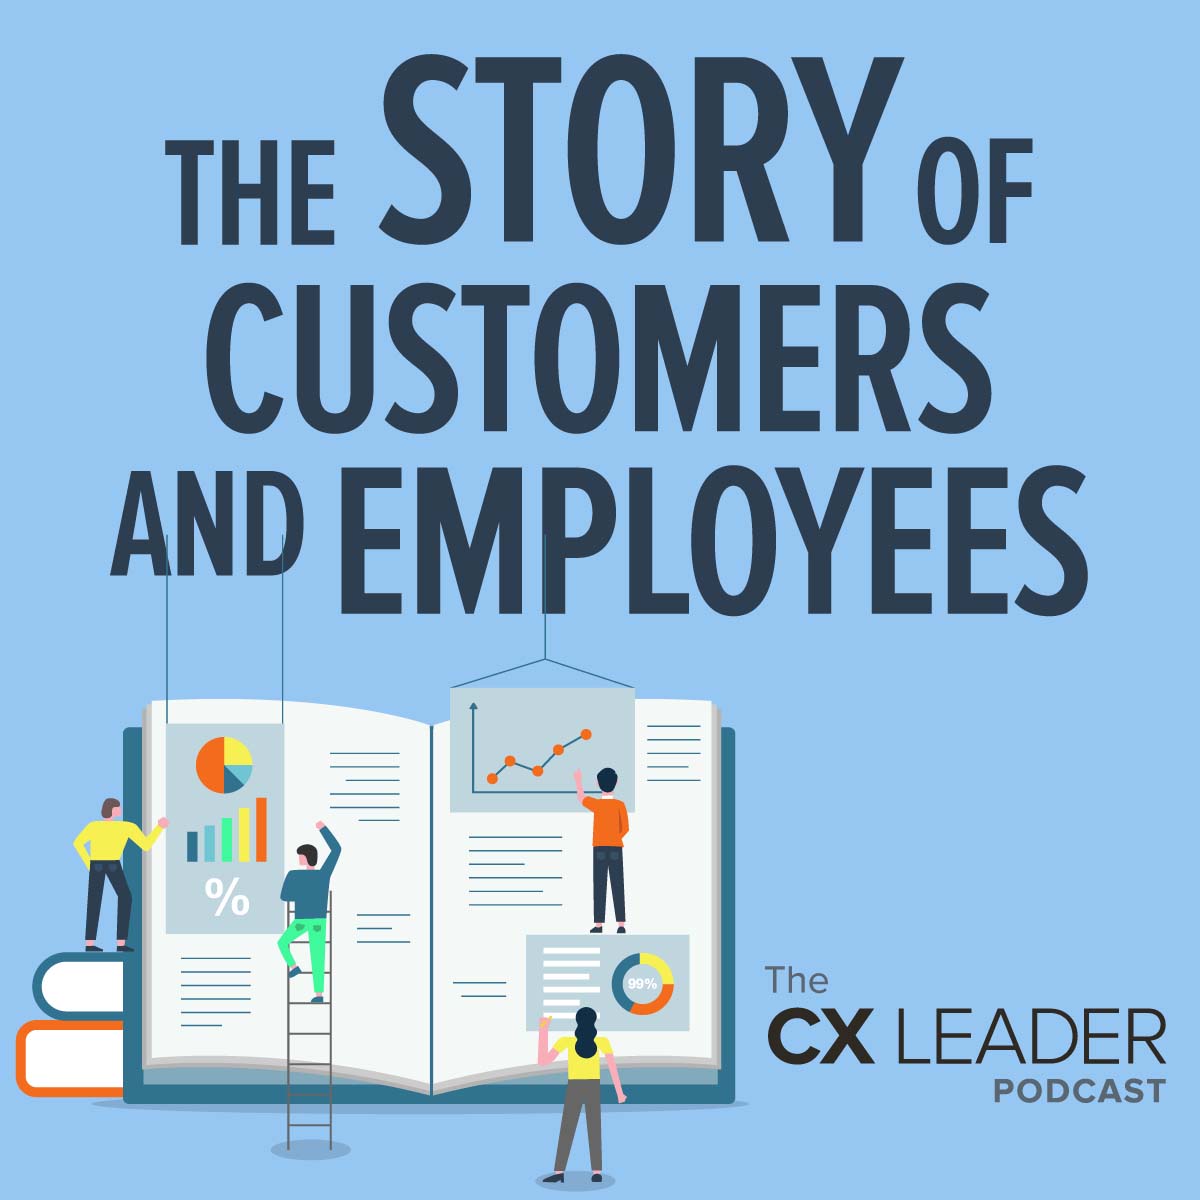 The Story of Customers and Employees